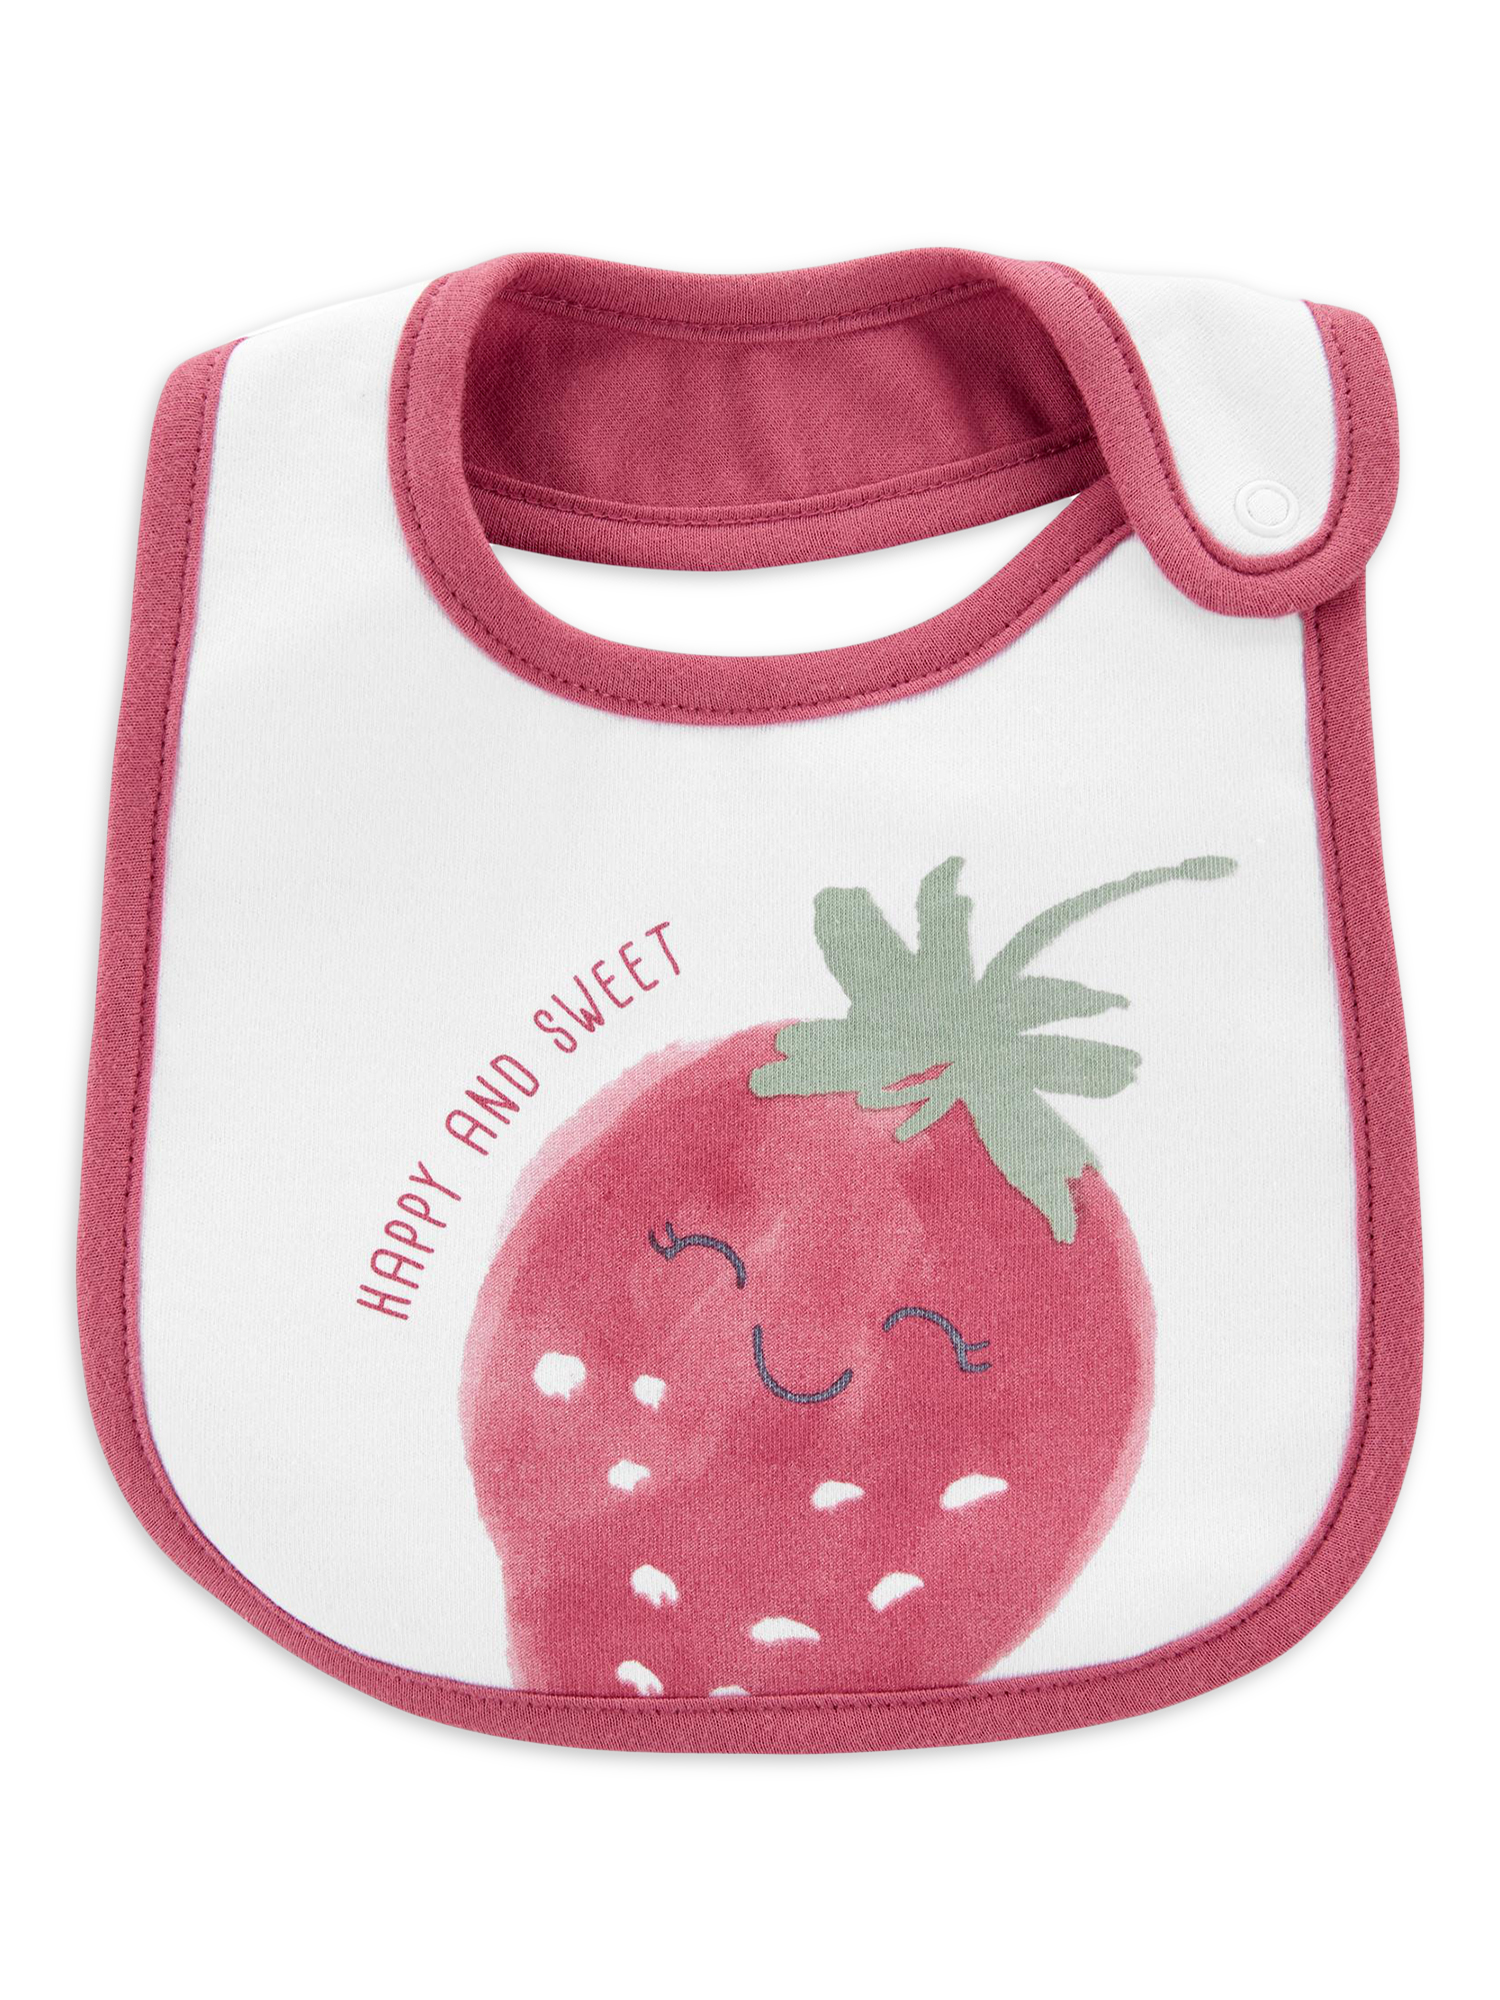 Carter's Child of Mine Baby Girl Cotton Bib, 3-Pack - image 2 of 4